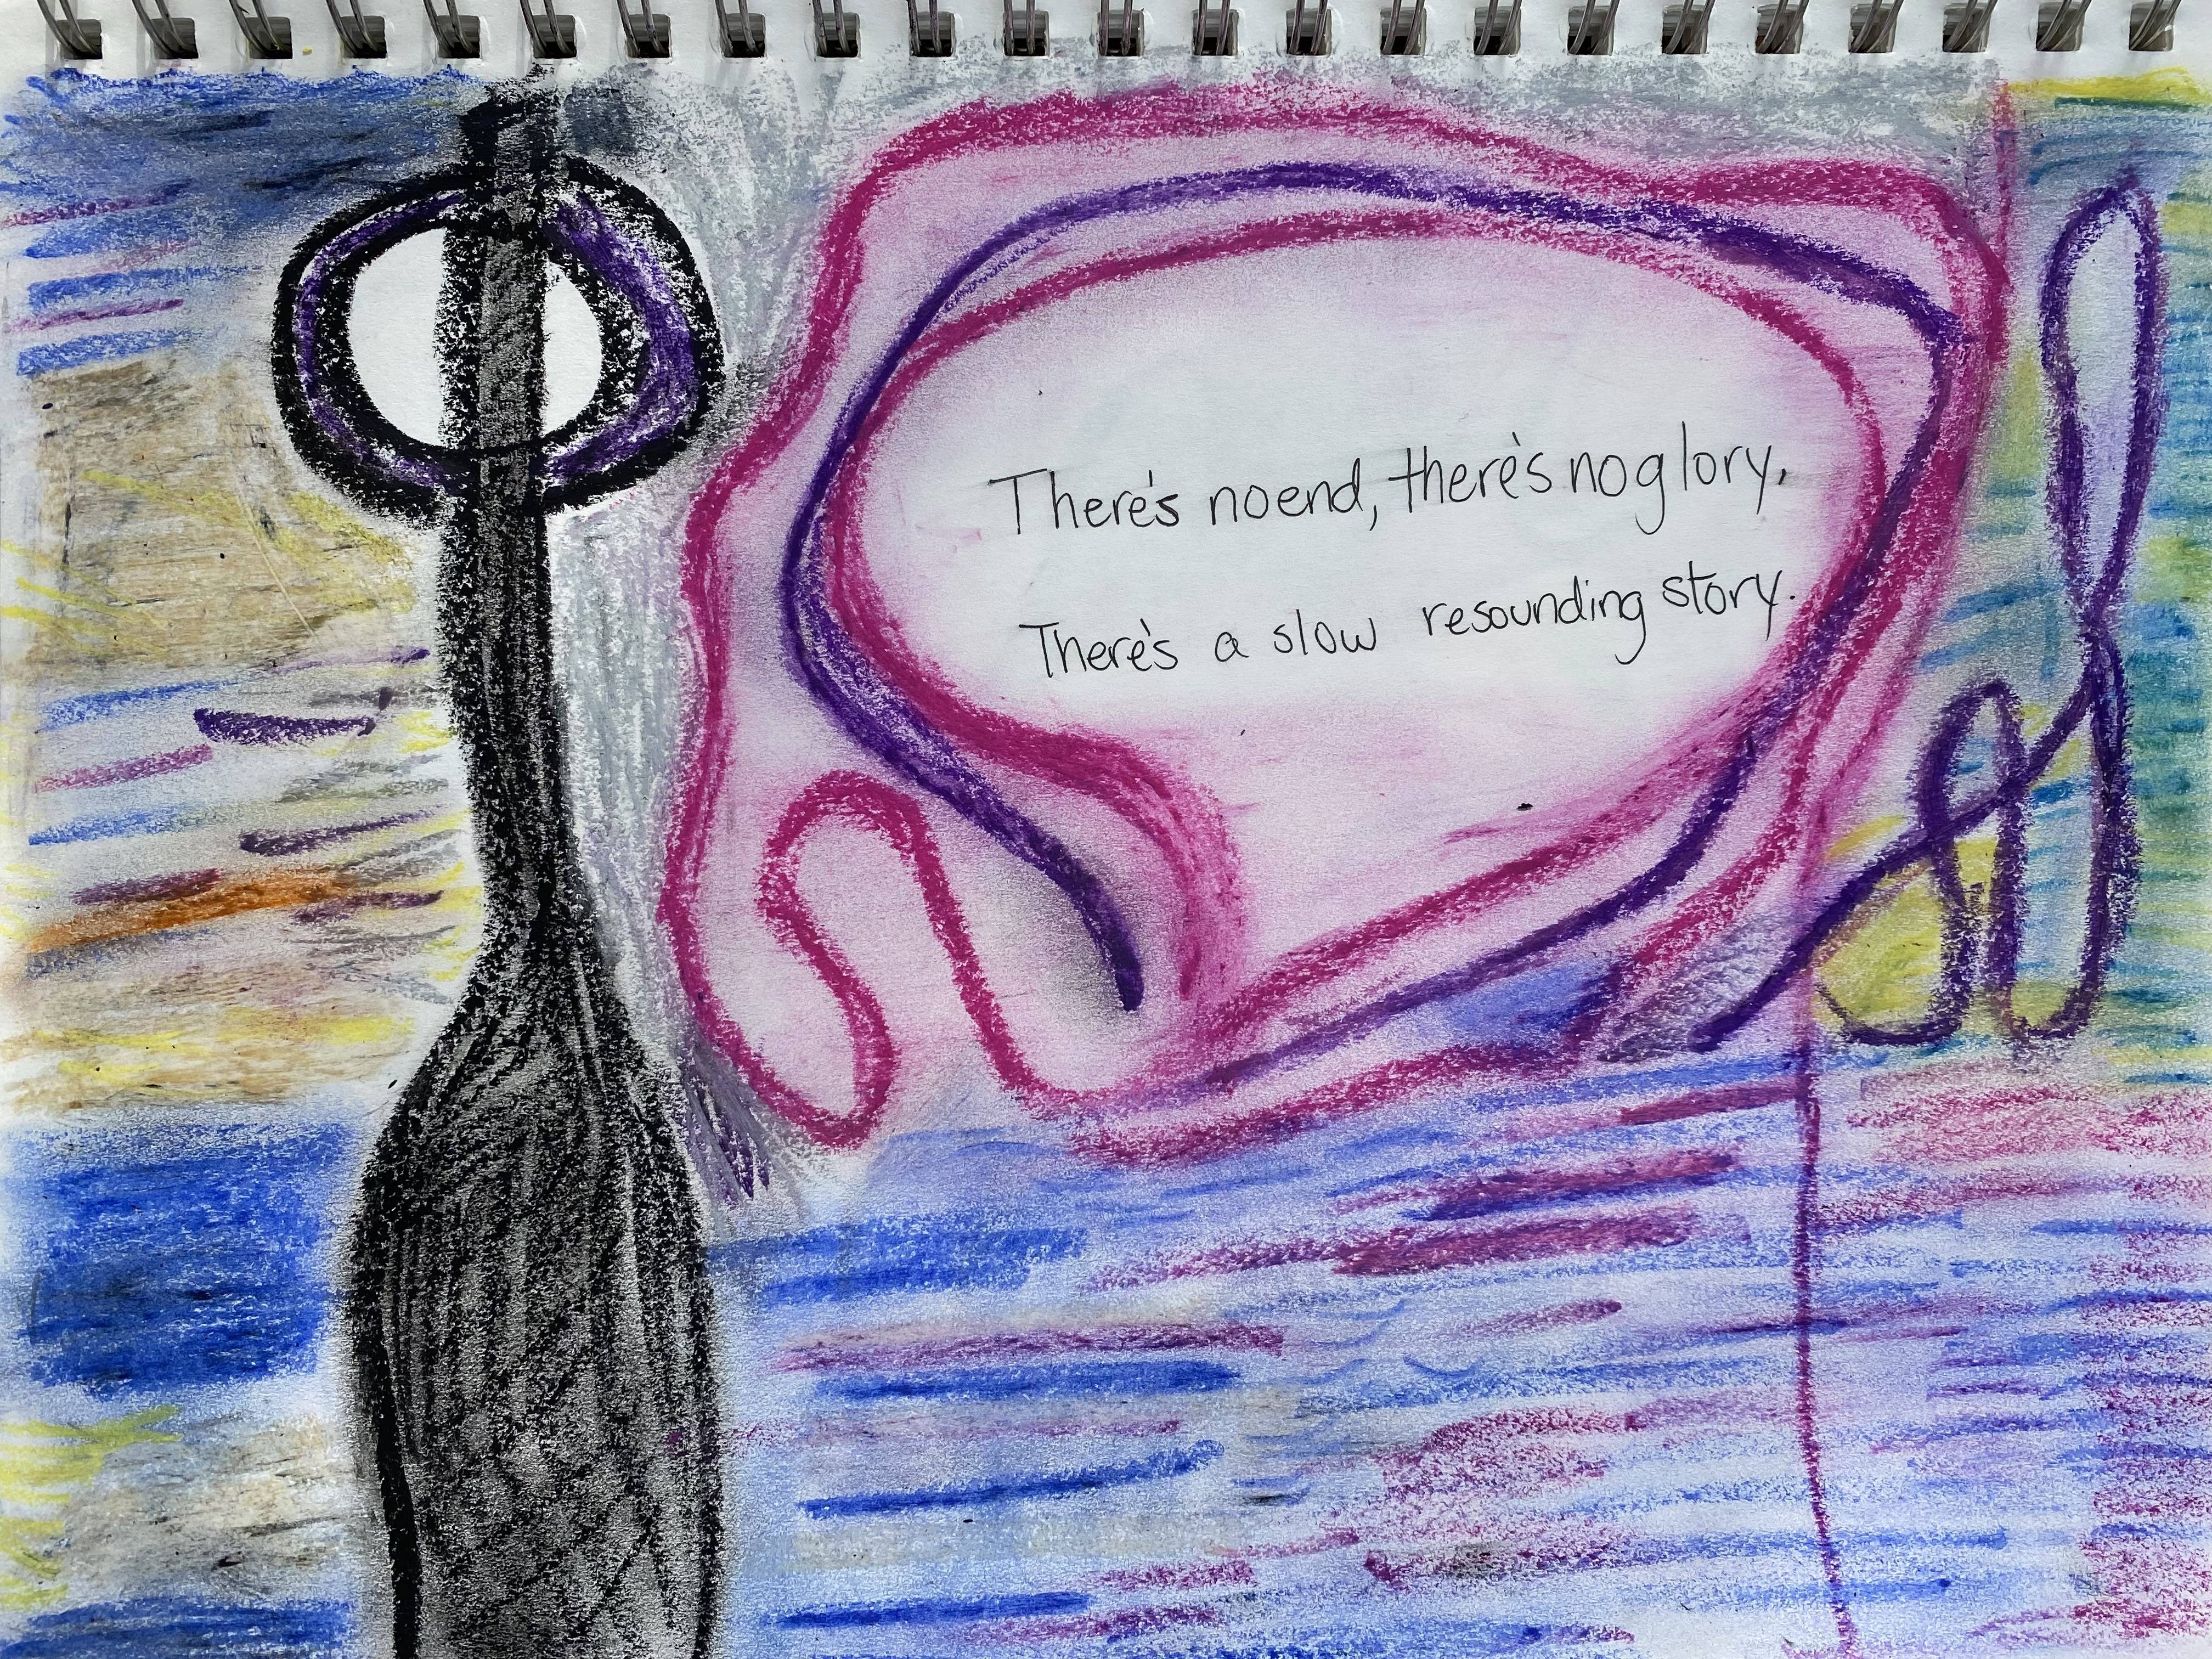 sketch made with The Artist's Loft oil pastels. In the center there is text that are lyrics from The Microphones 'There's no end, there's no glory, there's a slow resounding story.'